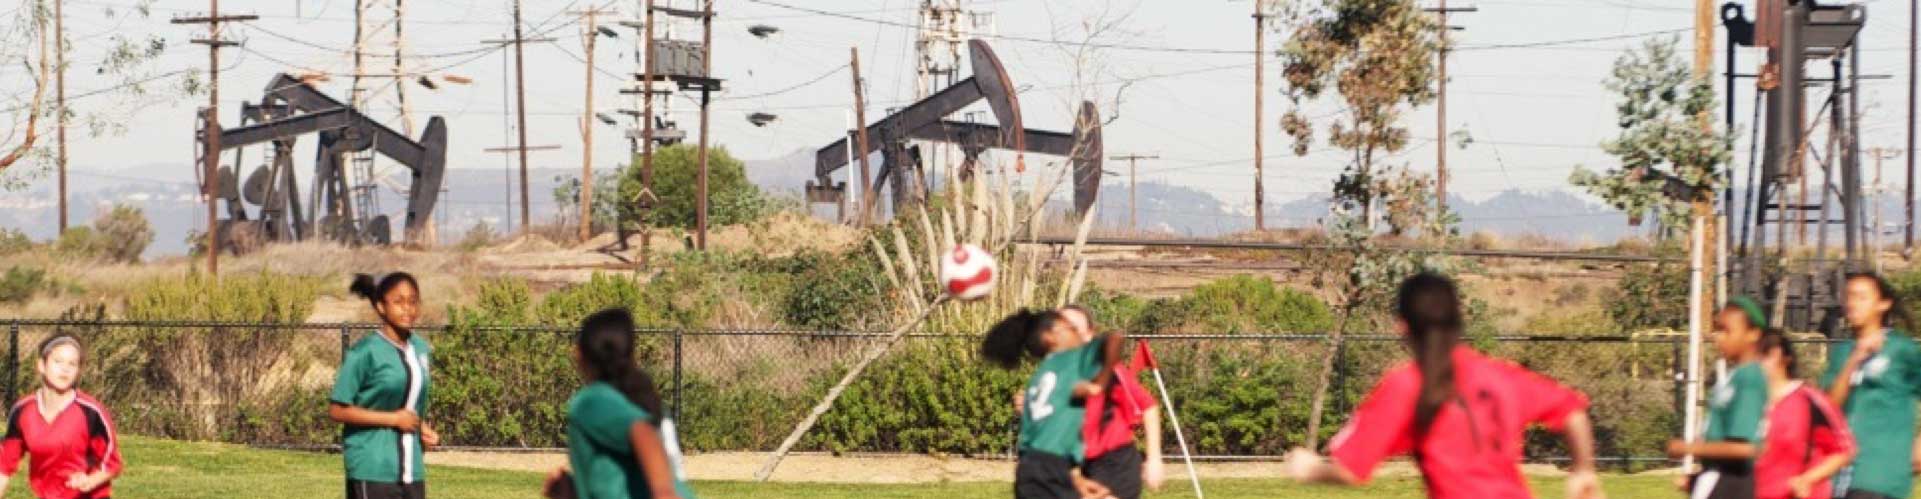 Kids playing soccer next to oil rigs